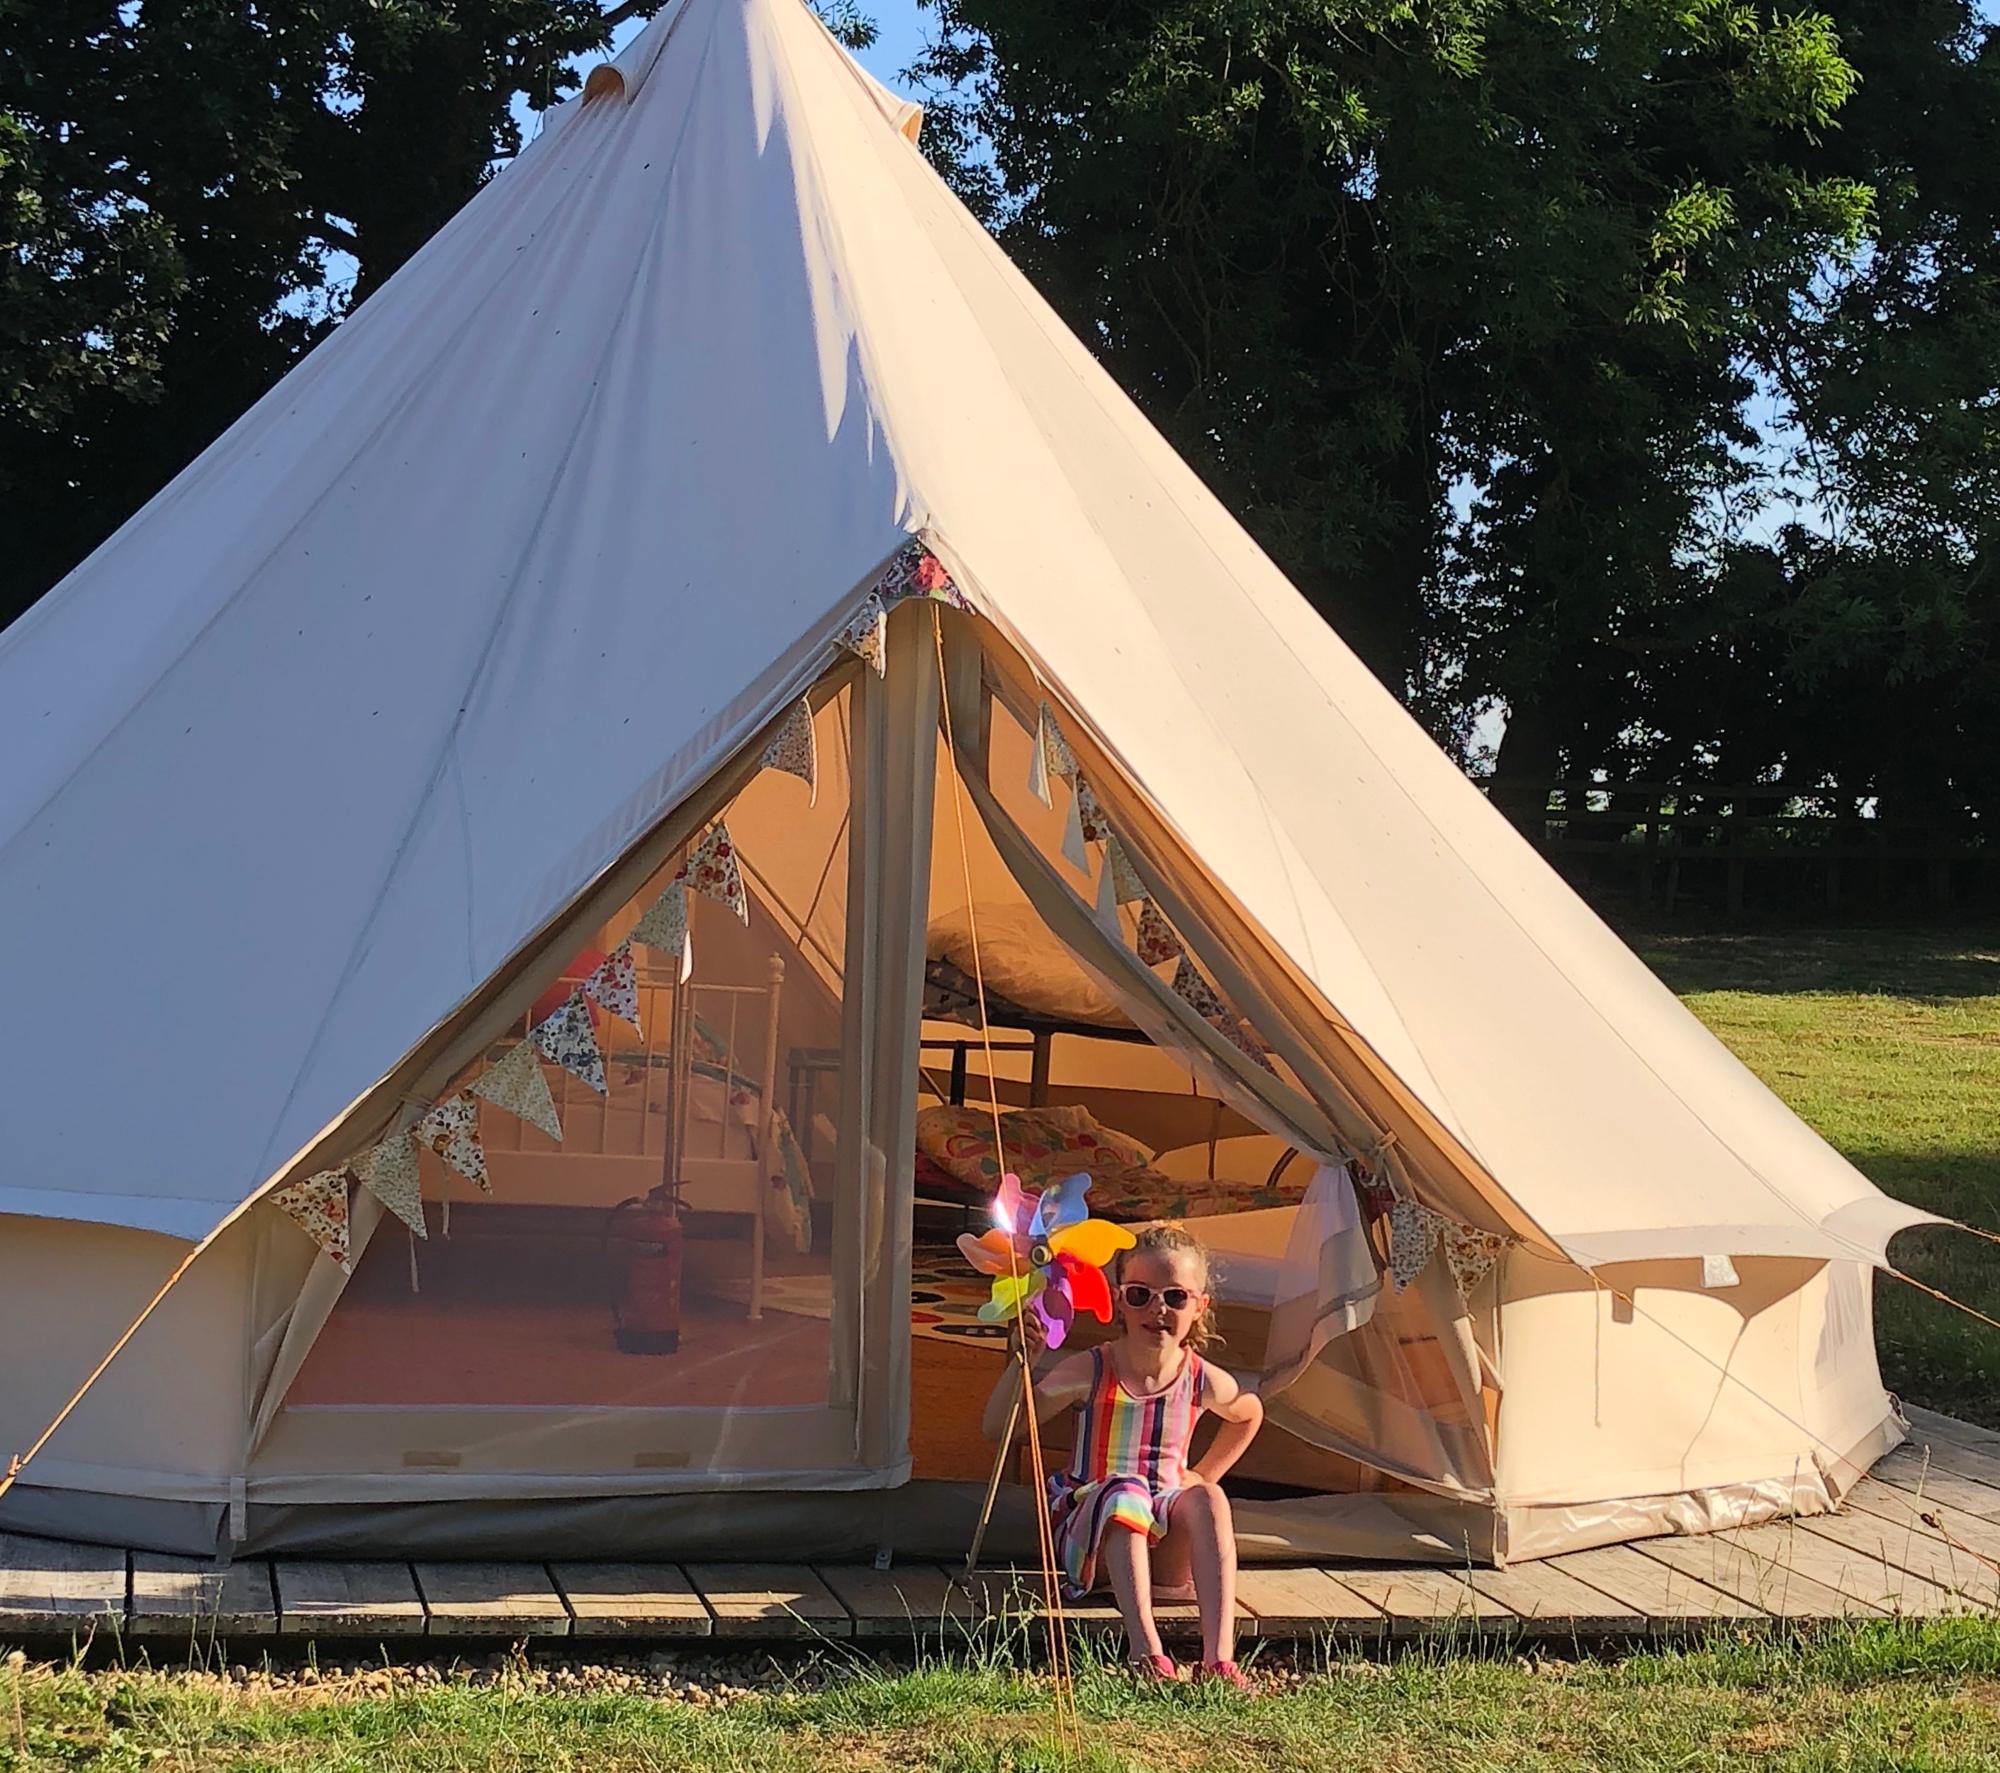 Glamping near me - find glamping near your location